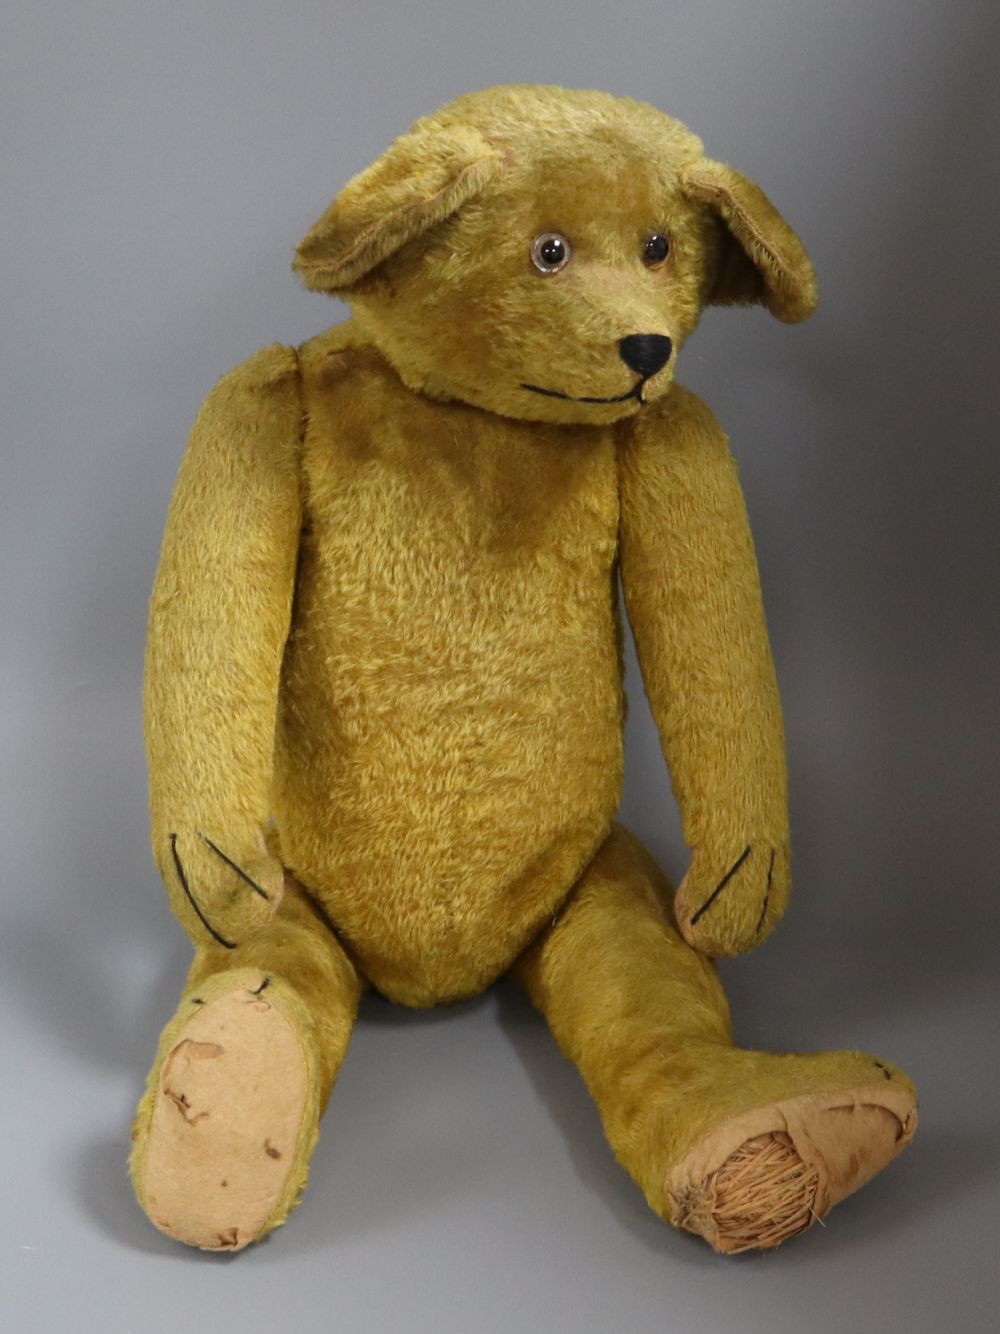 An early English teddy c.1920, 26in., short gold mohair, clear glass eyes, very large ears, foot pads have loss of felt